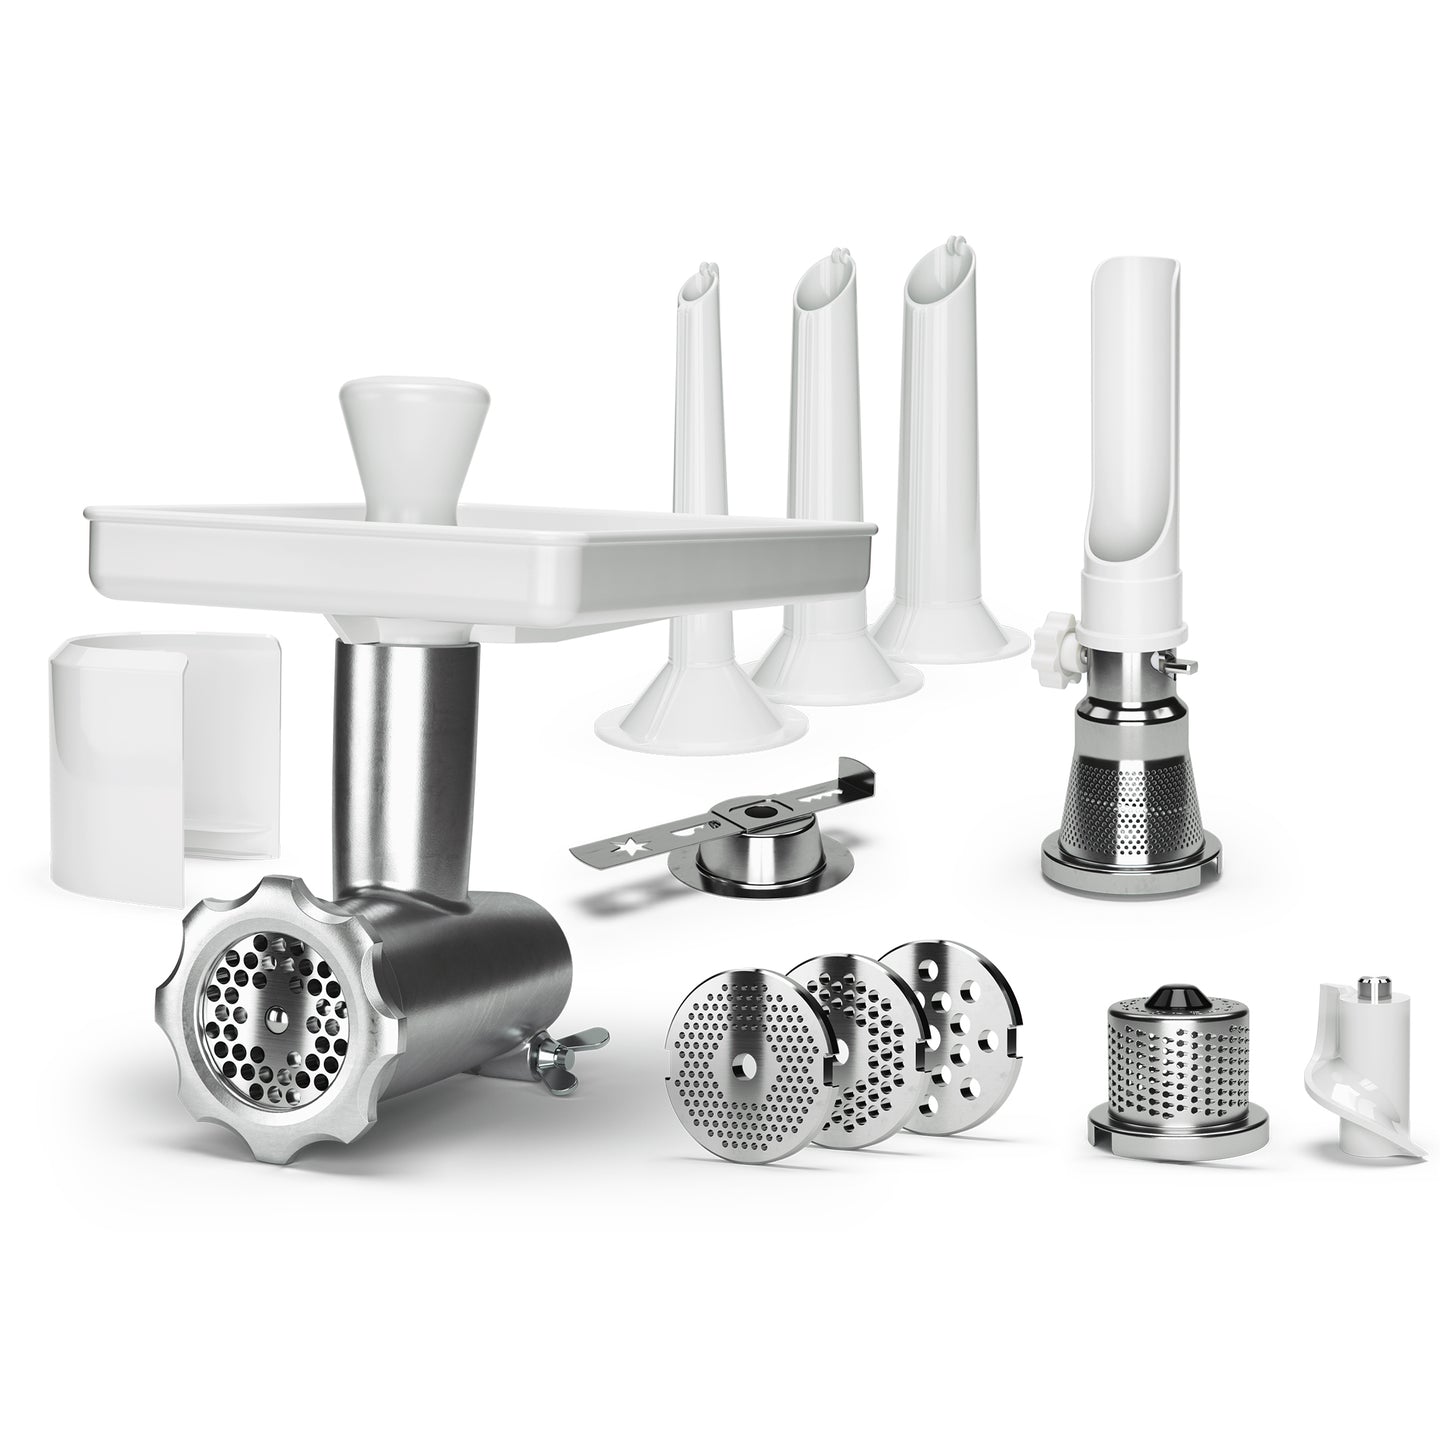 mincer complete package contains mincer, 3 sausage horns 10/20/25mm, feeder tray, feeder plug, 4x hole discs plates 2.5/4.5/6/8mm, strainer, grater, cookie attachment, and splashguard for the mince